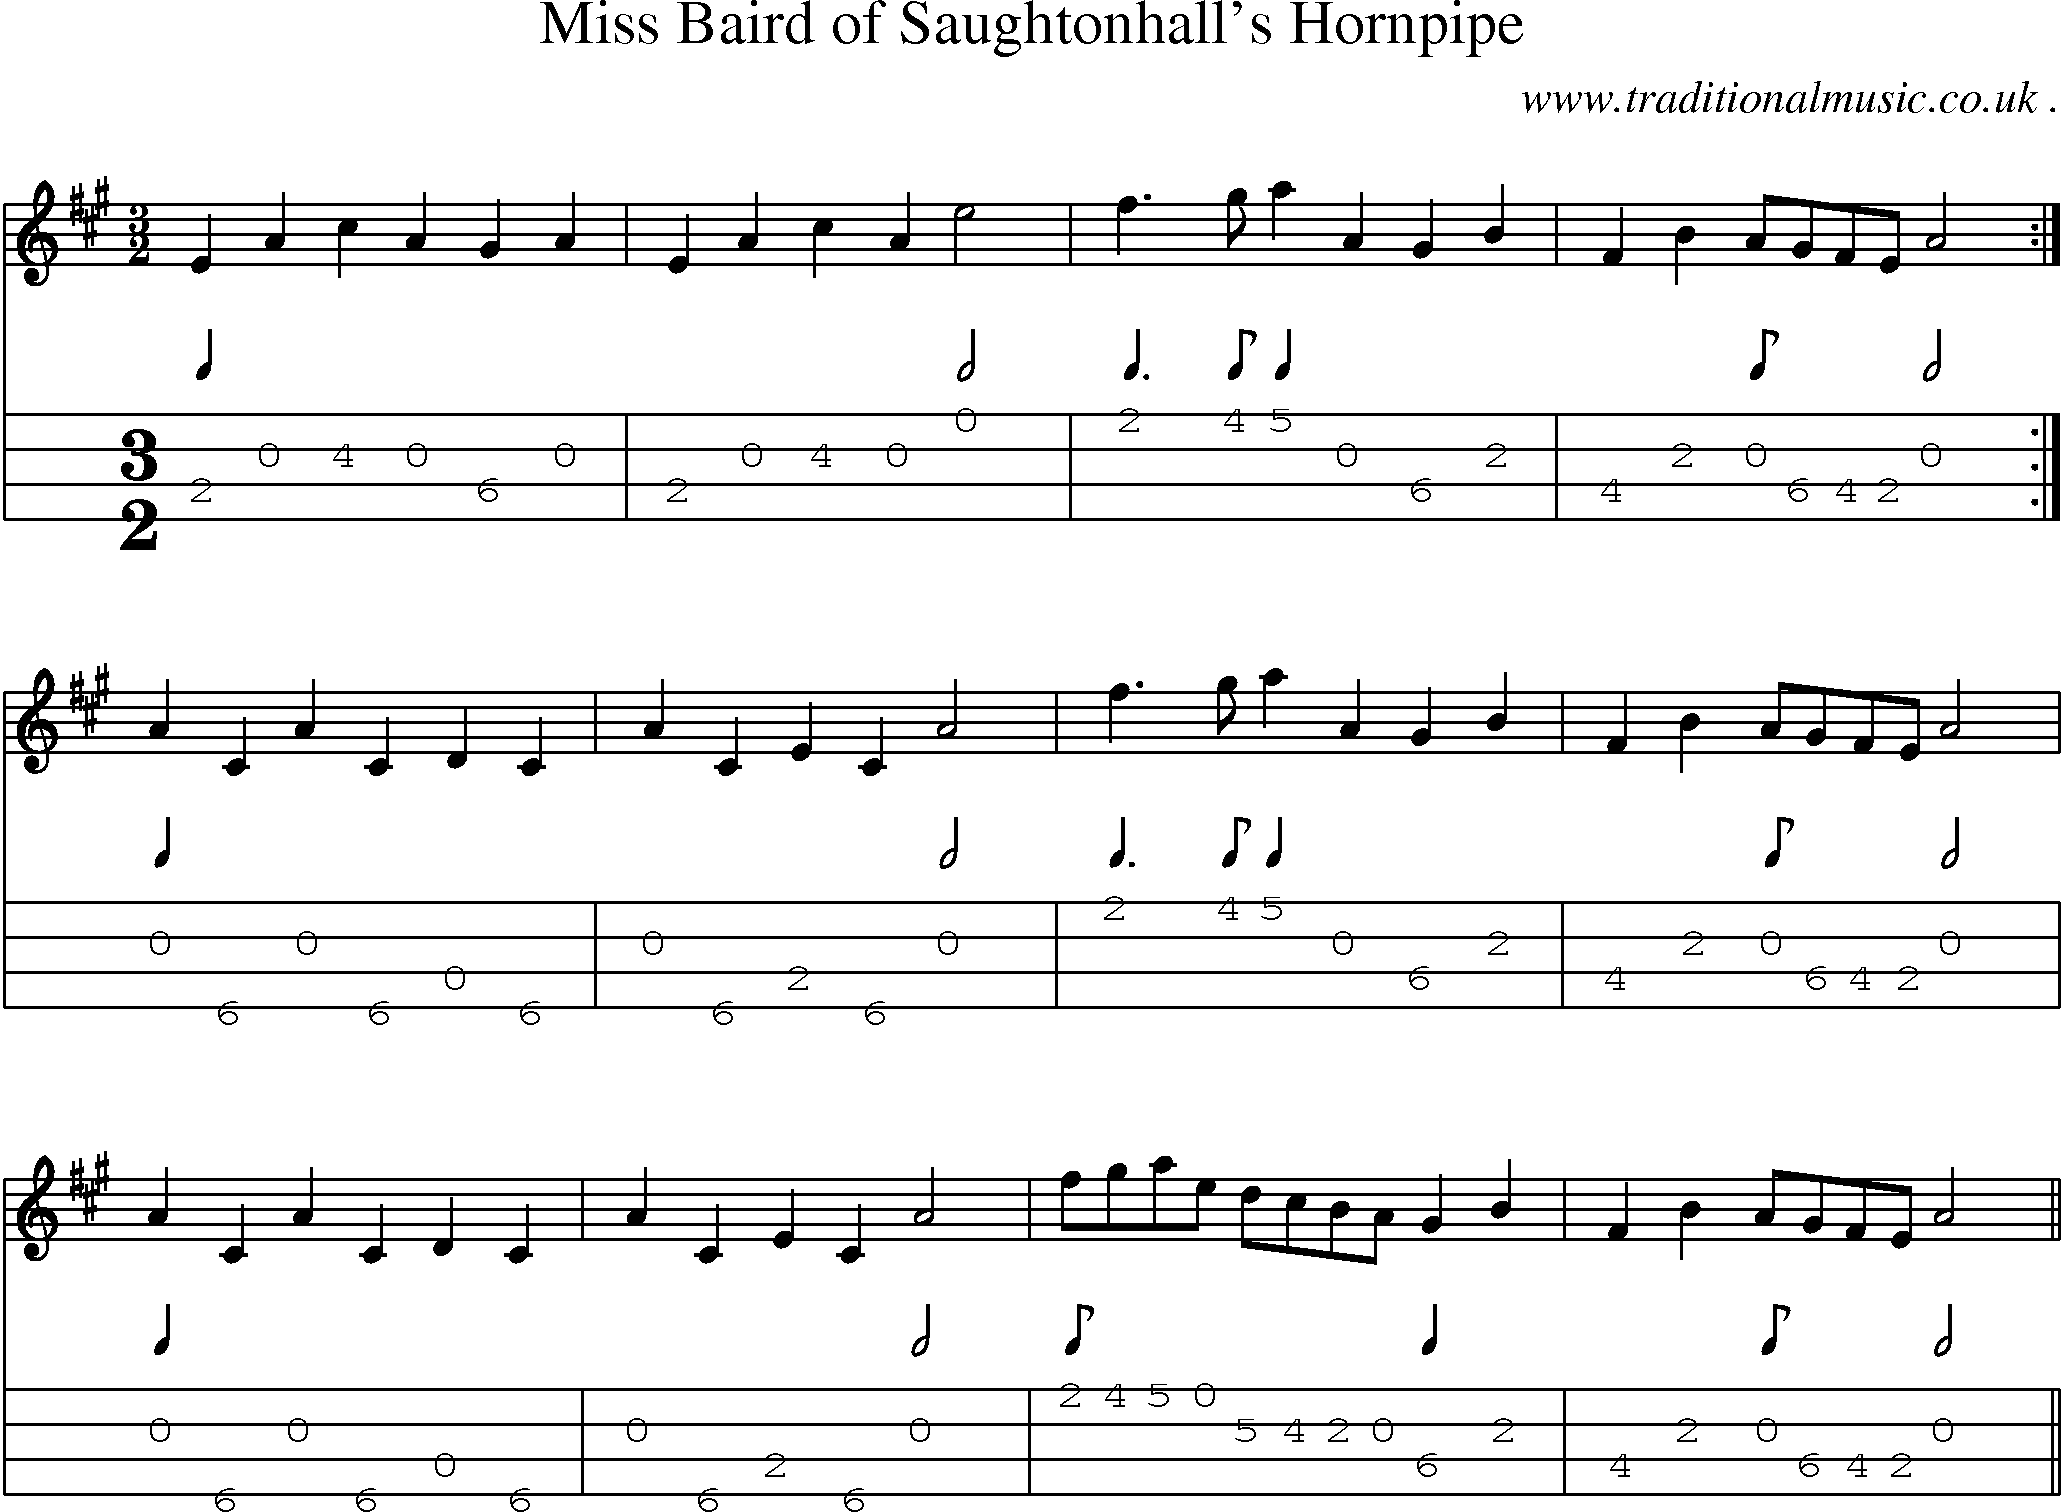 Sheet-Music and Mandolin Tabs for Miss Baird Of Saughtonhalls Hornpipe